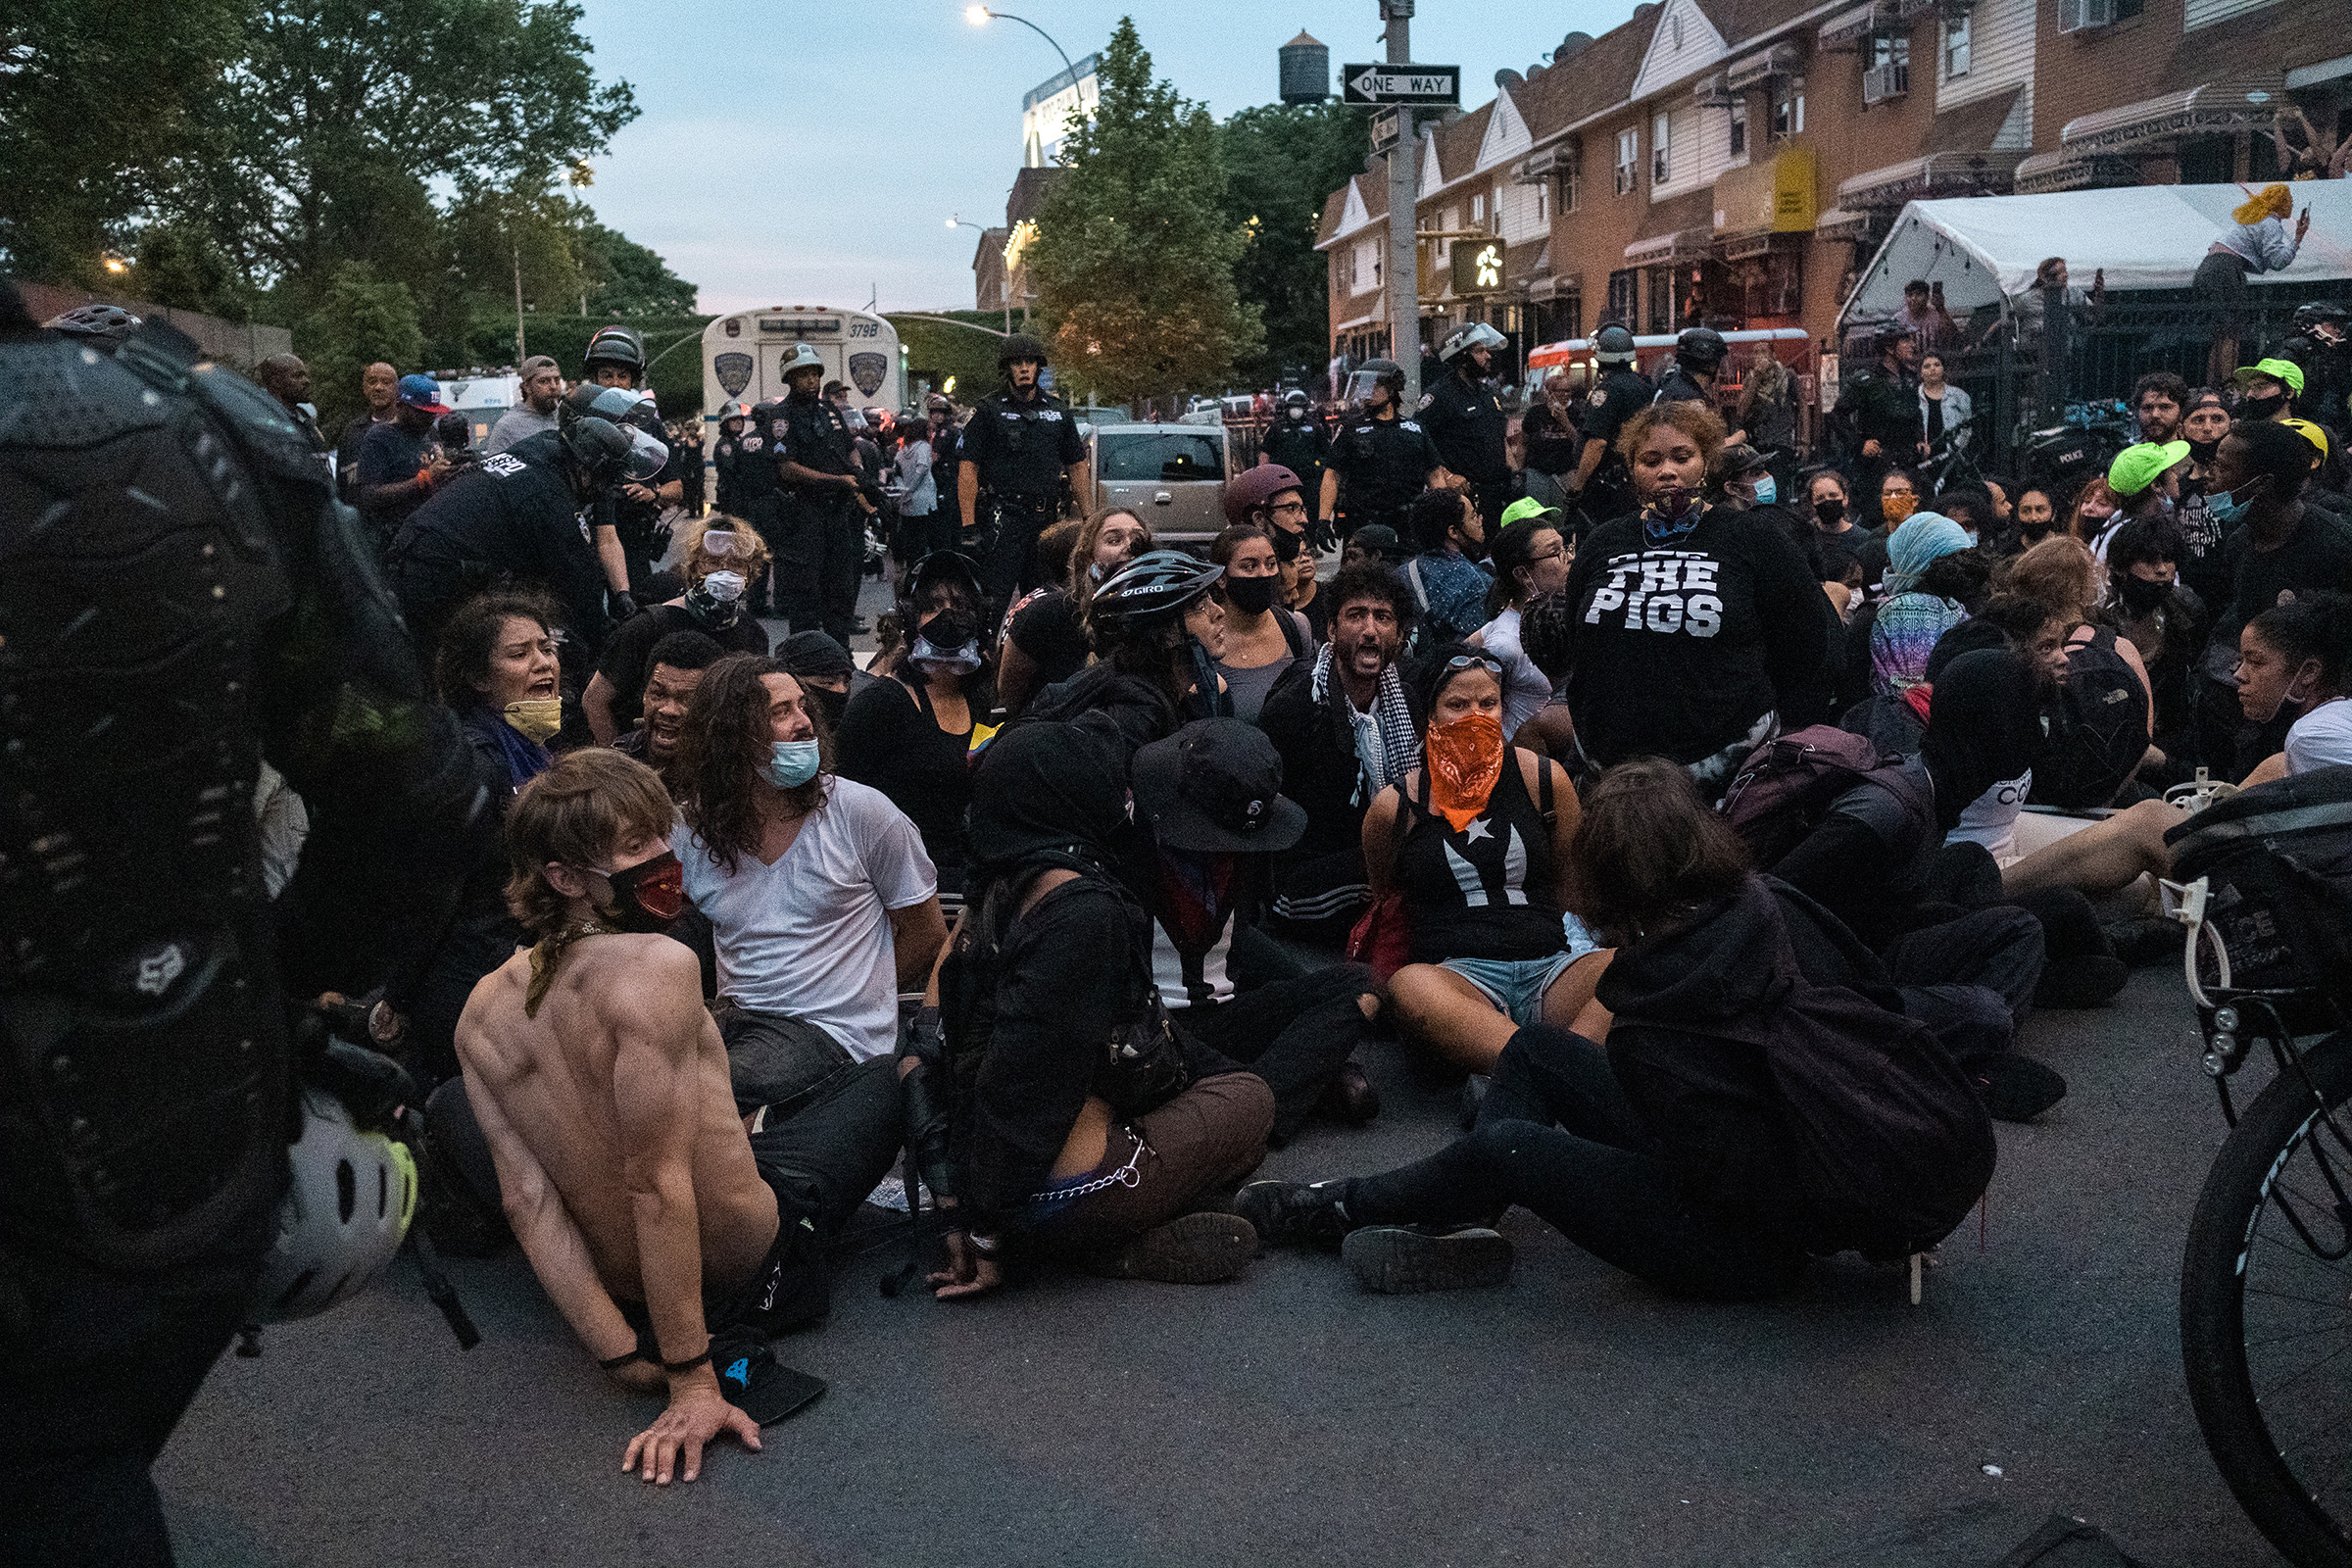 Demonstrators after being detained by police officers during a protest against the death of George Floyd in Mott Haven, the Bronx, on June 4, 2020 (Gabriela Bhaskar—The New York Times/Redux)